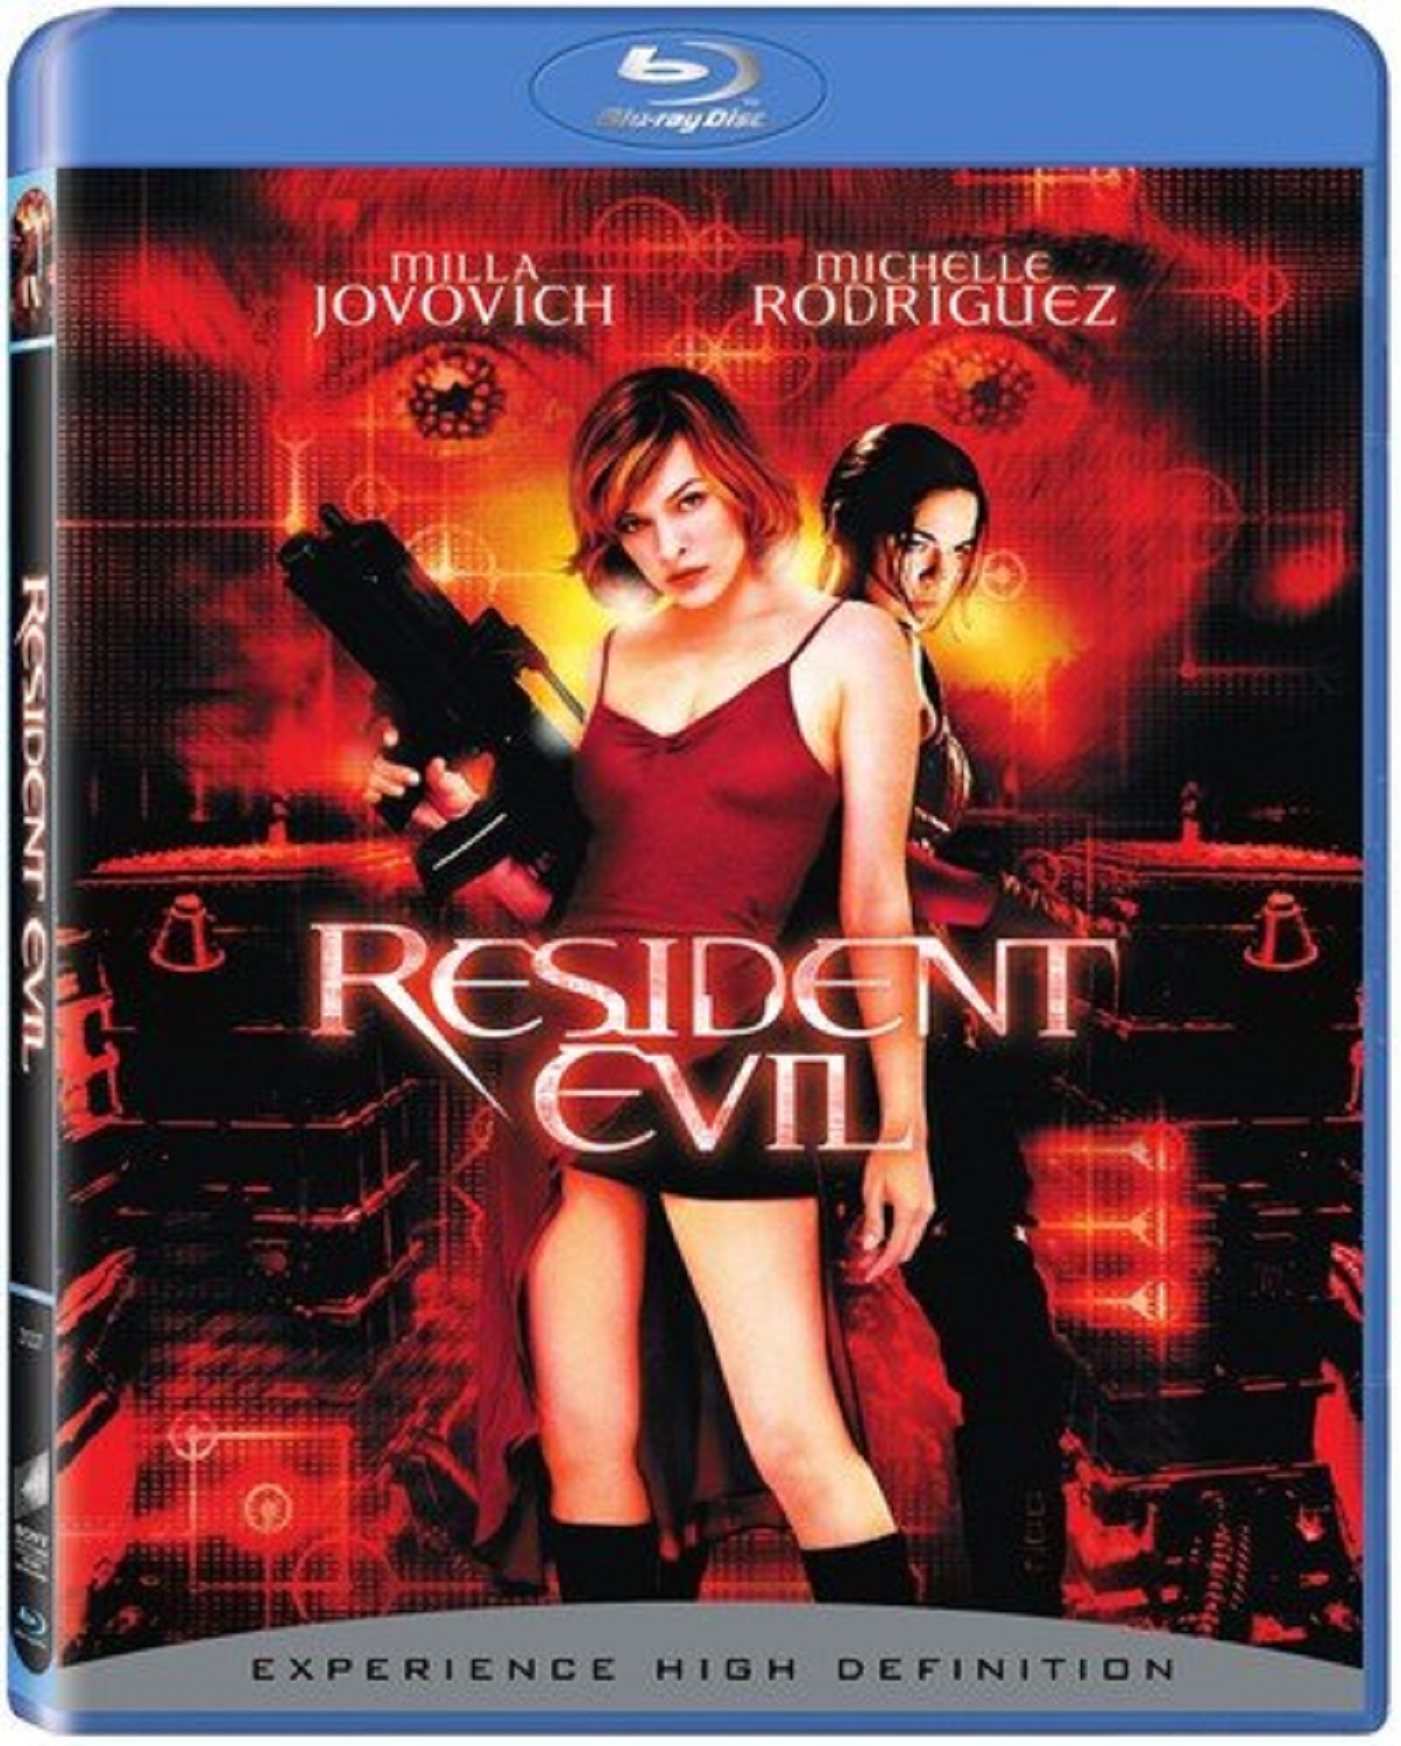 Resident Evil (Blu-ray), Sony Pictures, Horror - image 2 of 2